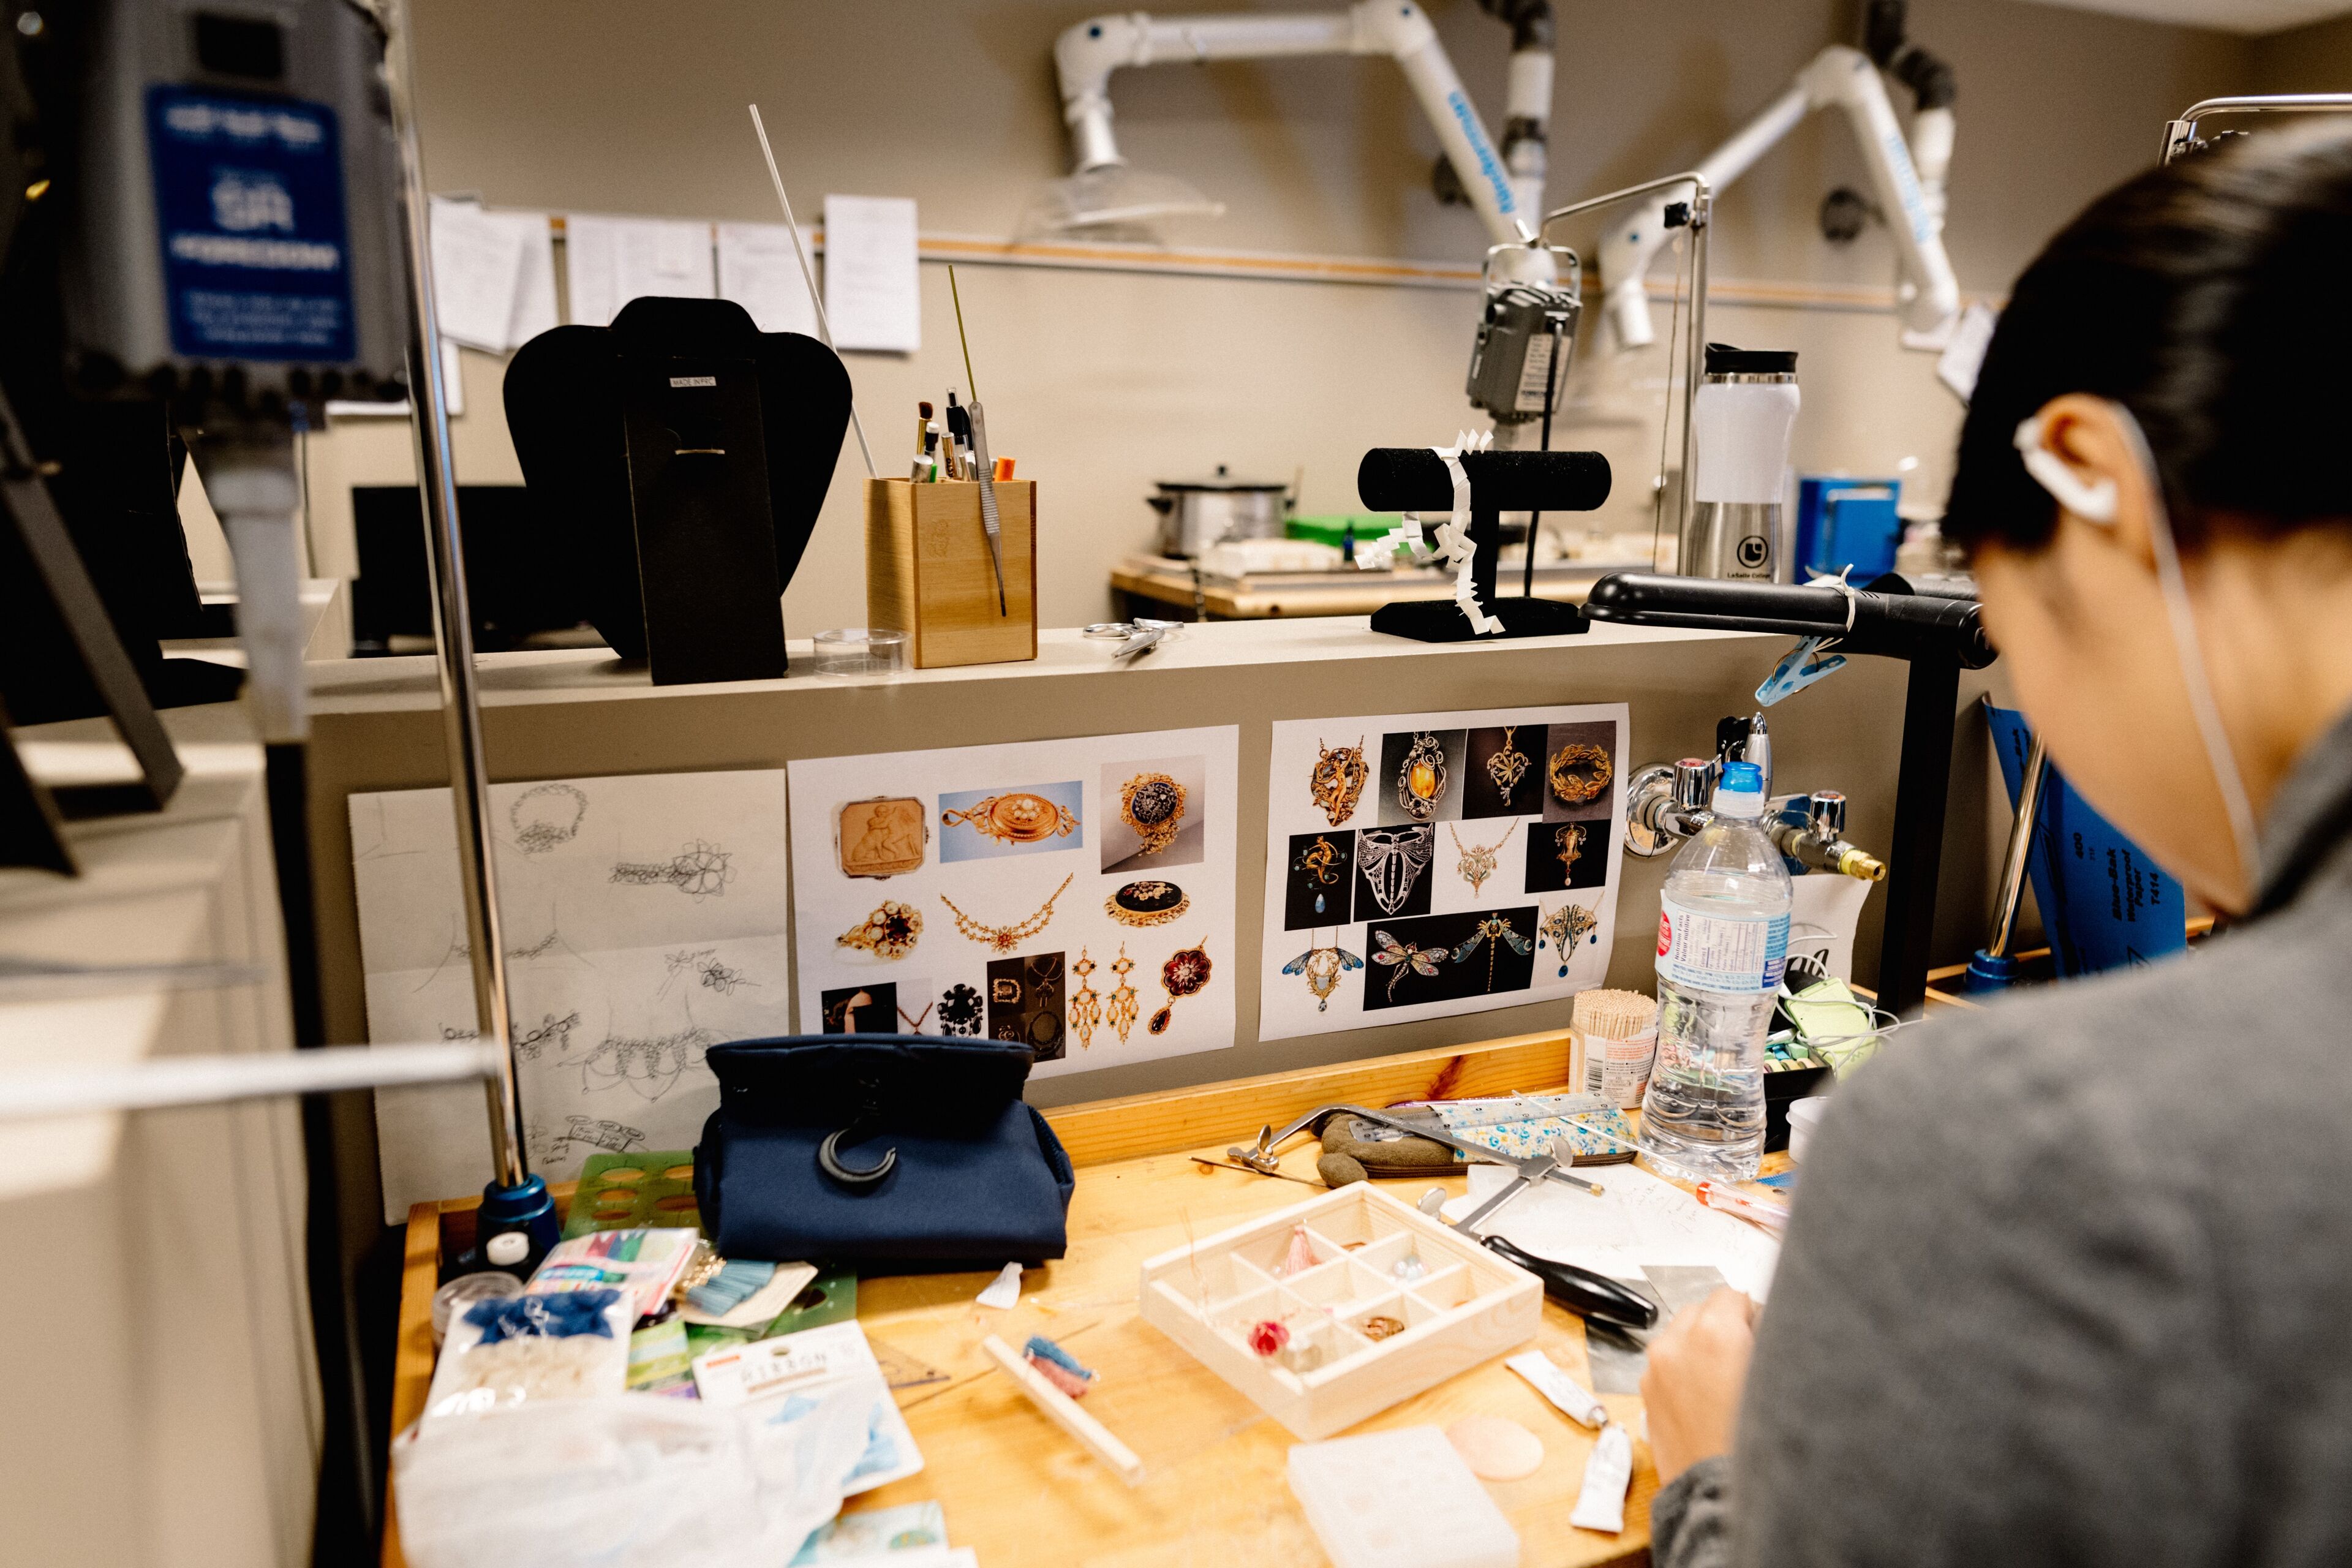 A jeweler meticulously assembles pieces amidst a workshop, surrounded by tools and designs.